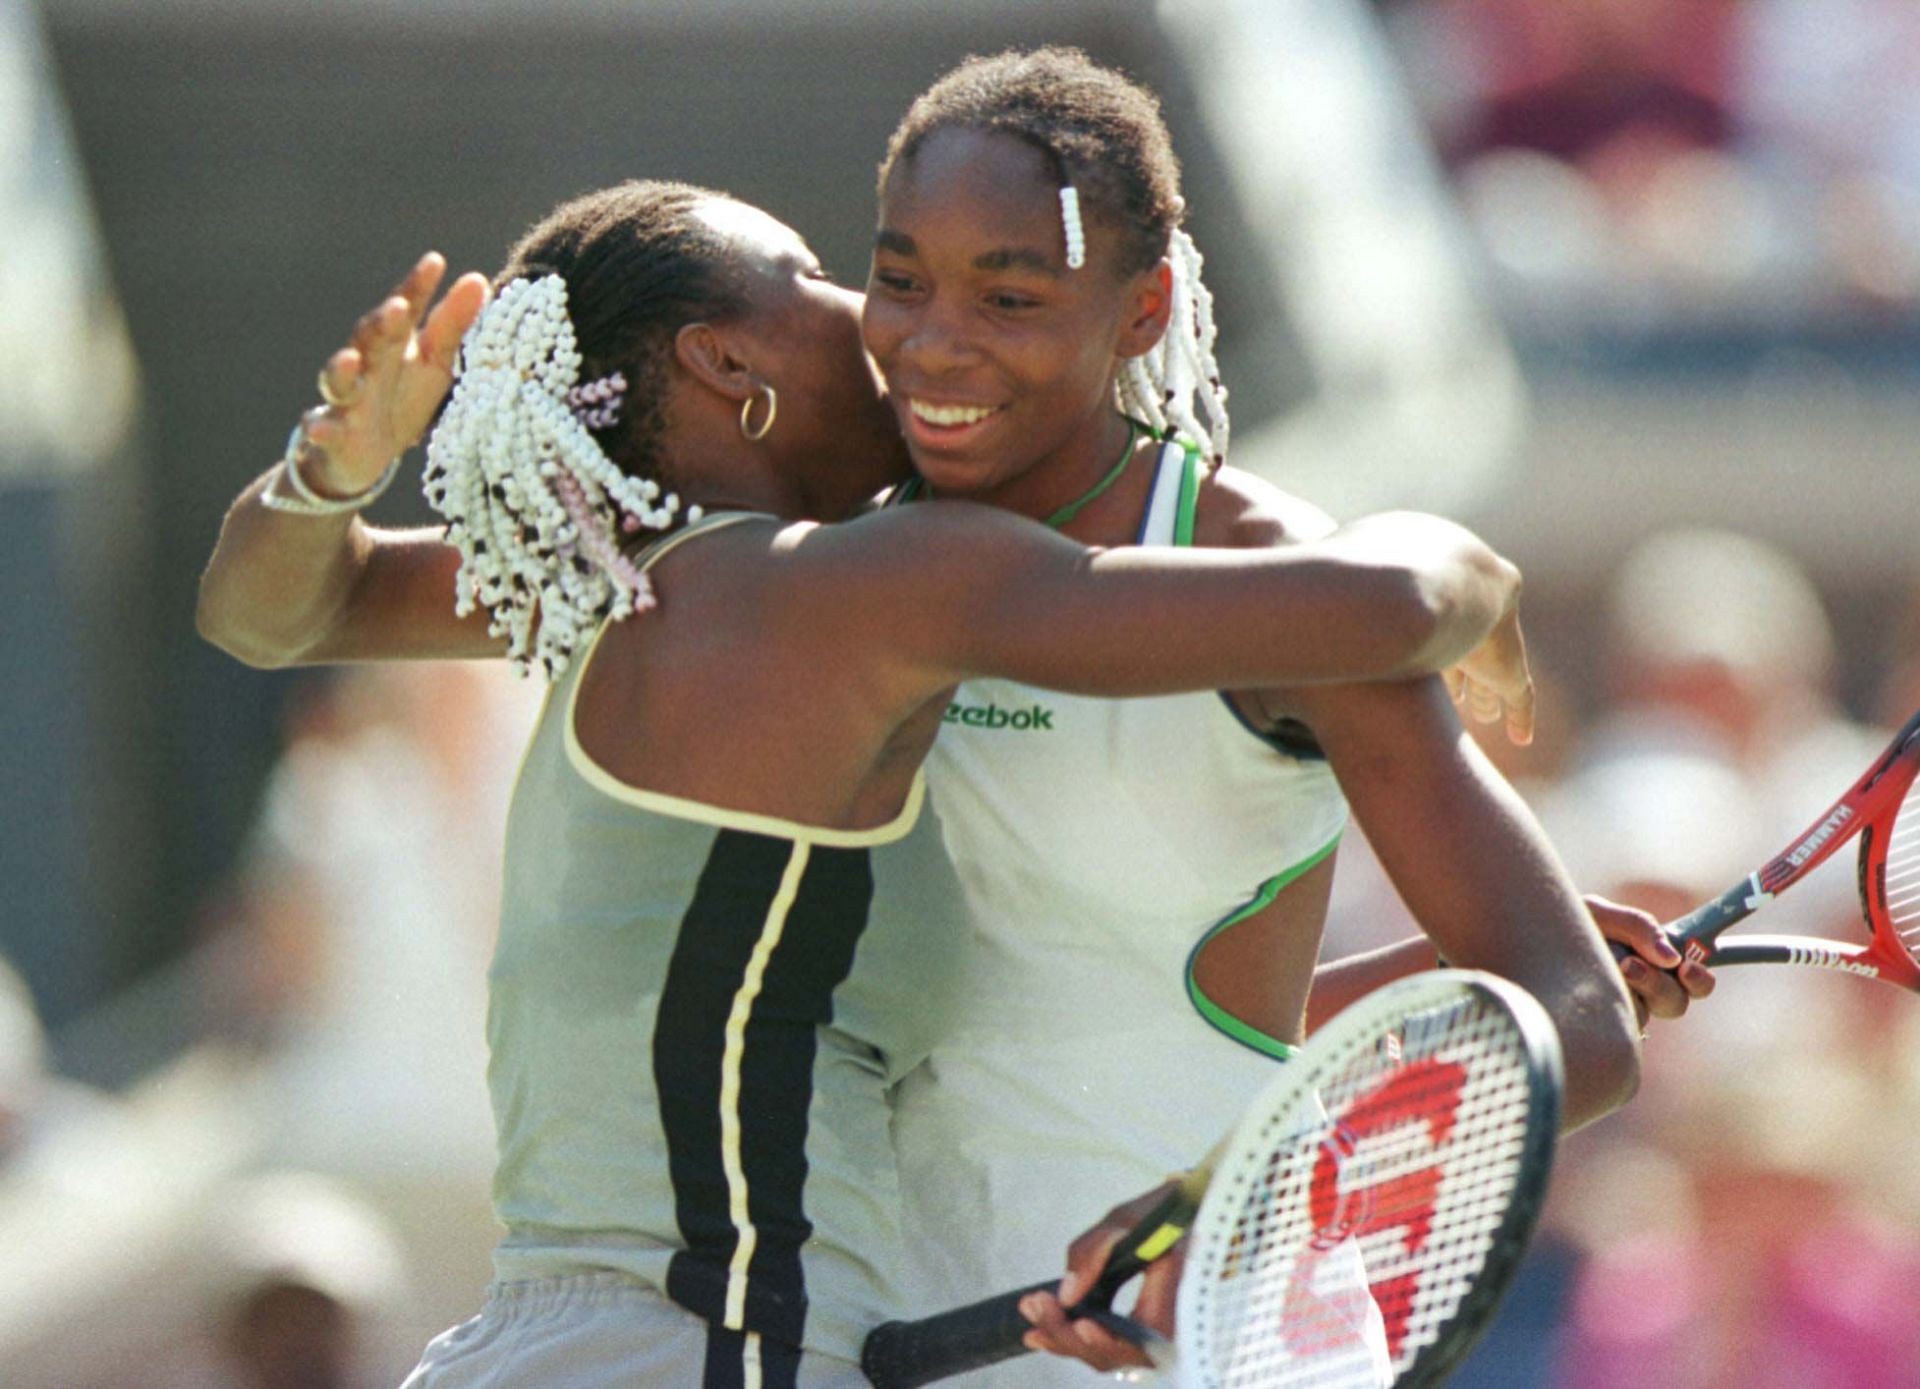 The Williams sisters rose to fame after making their mark at the US Open.